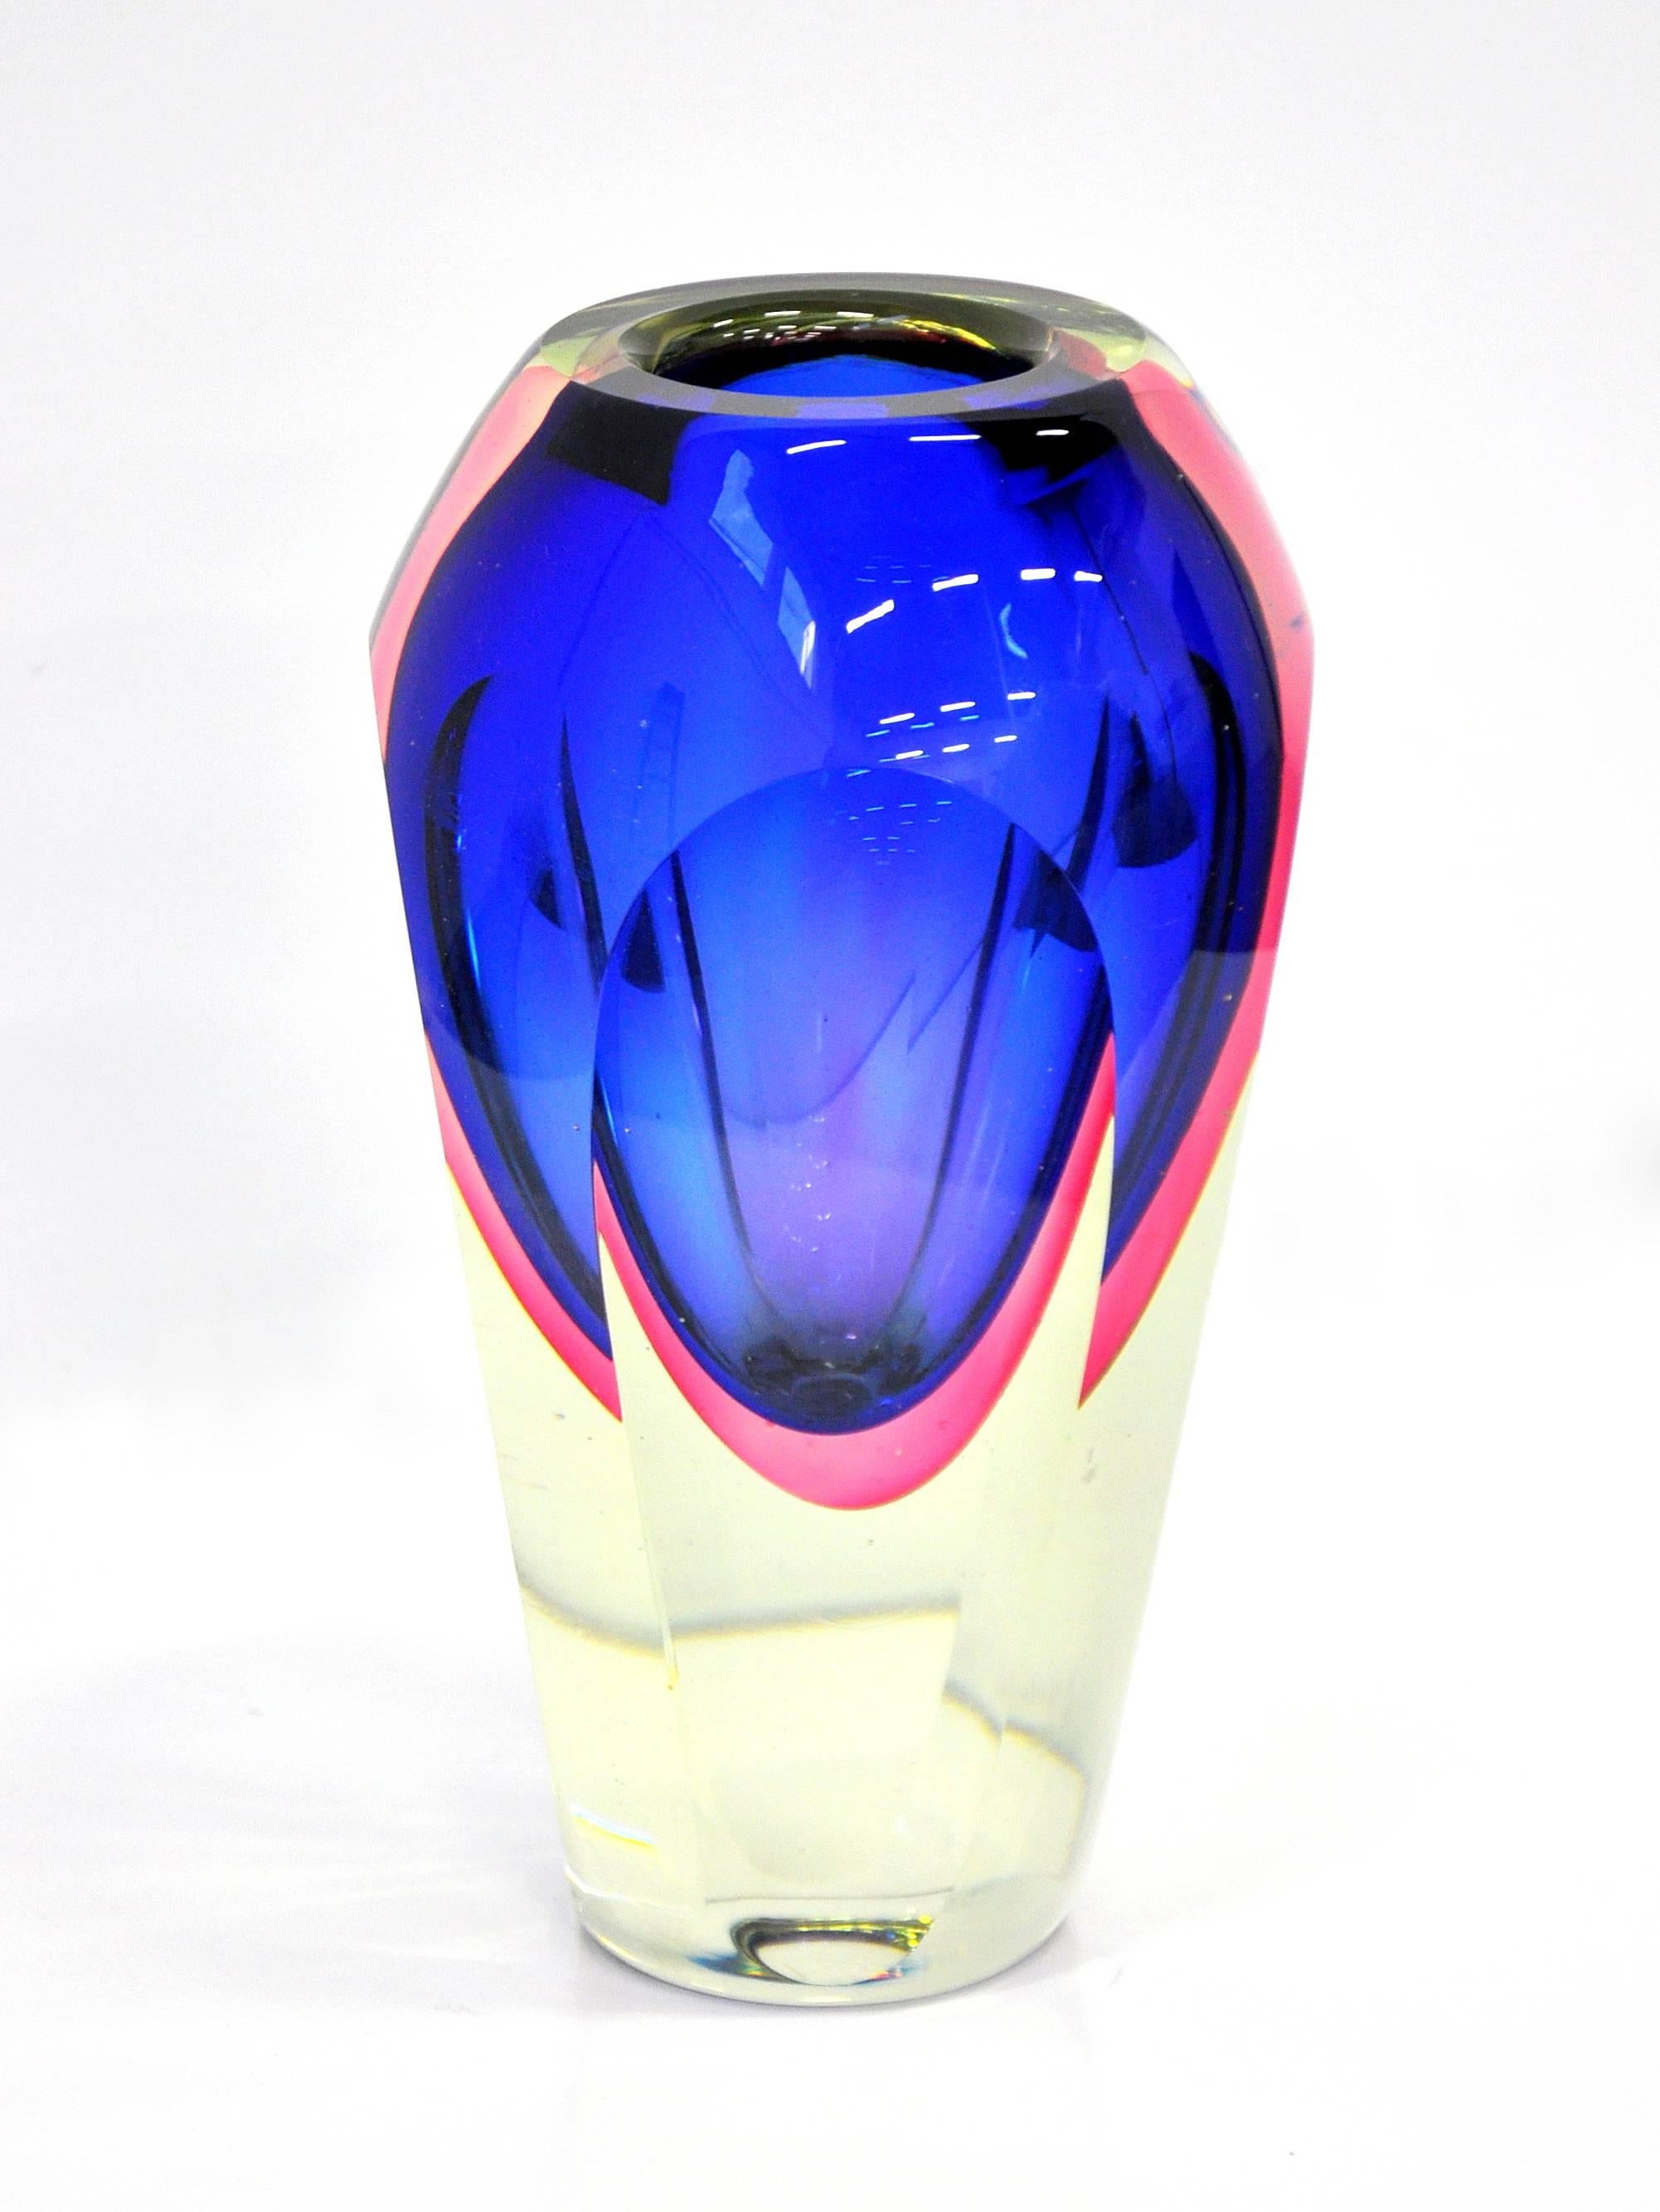 Stunning Venetian glass Sommerso vase designed by Flavio Poli for Seguso Vetri d'Arte, dating from the 1960s. The large faceted vase displays vibrant colors ranging from cobalt blue, purple and pink to clear. A fabulous example of Italian